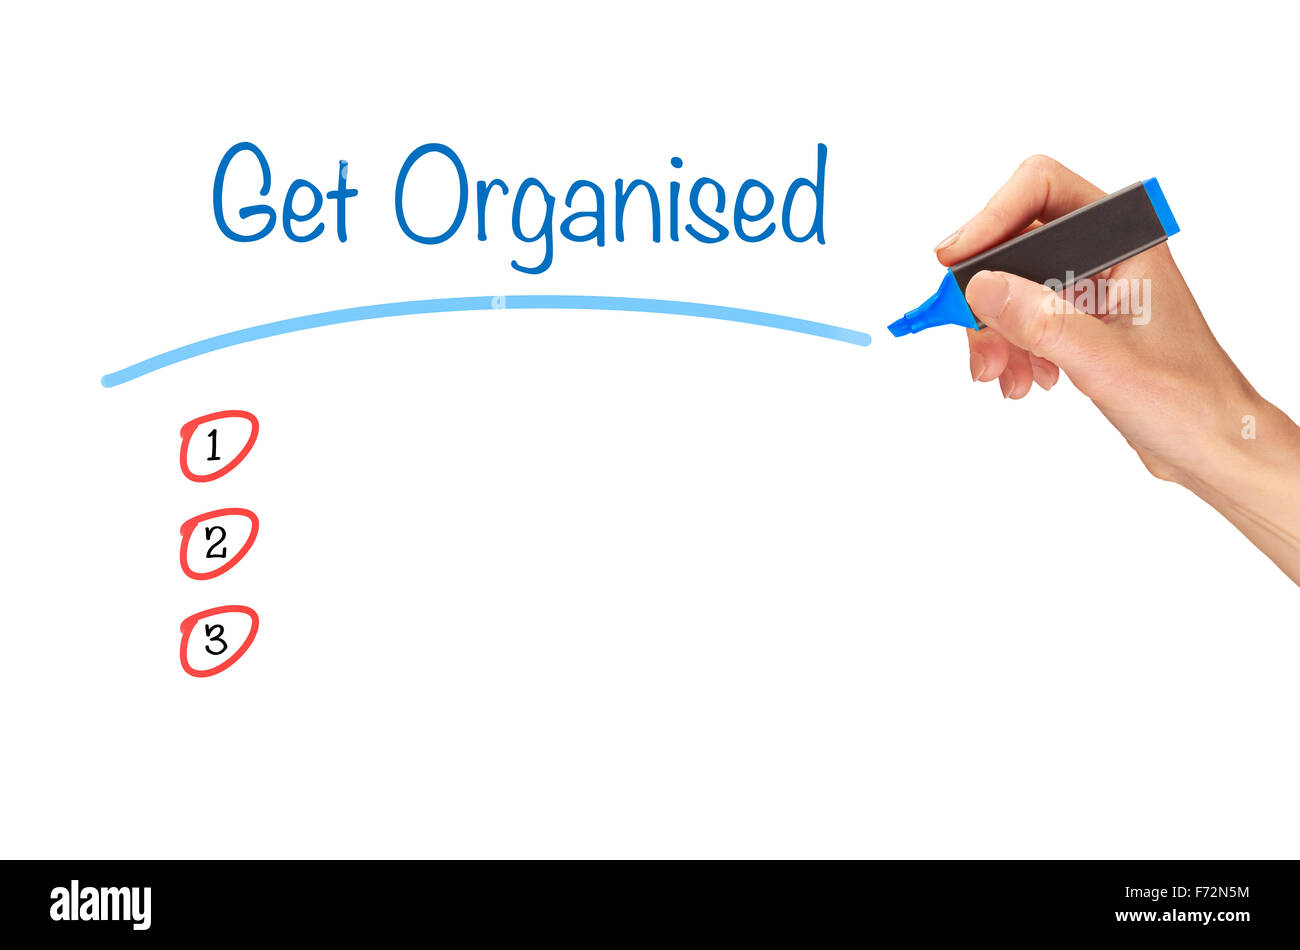 Get Organised, written in marker on a clear screen. Stock Photo